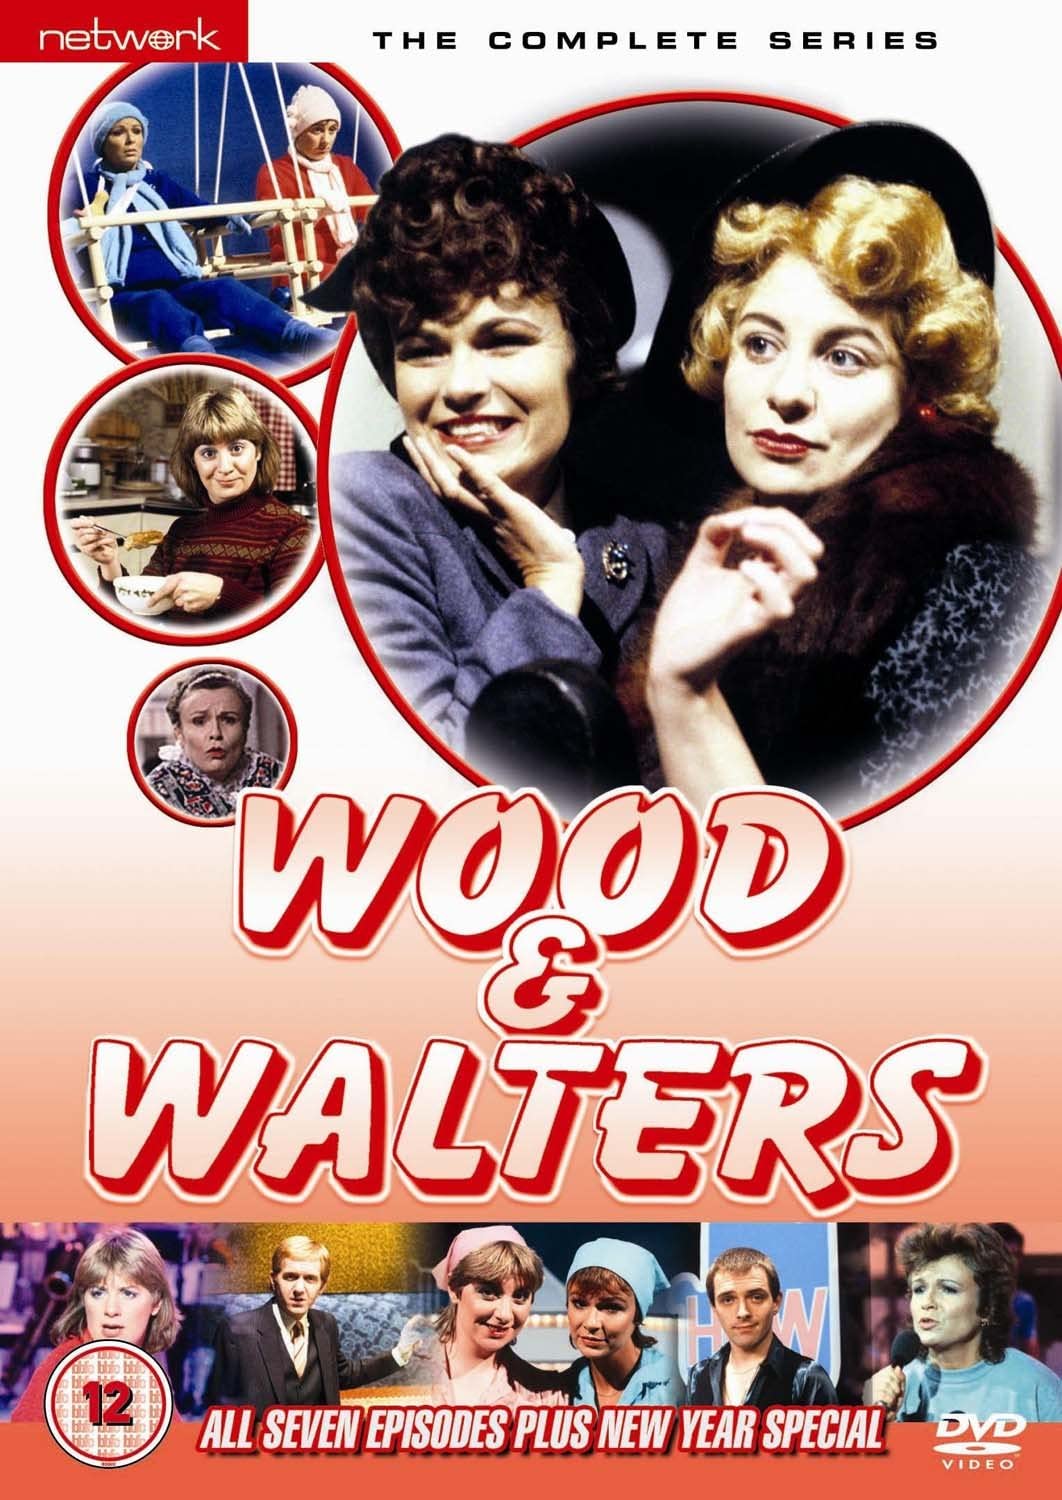 Wood and Walters - The Complete Series [1981] [DVD]